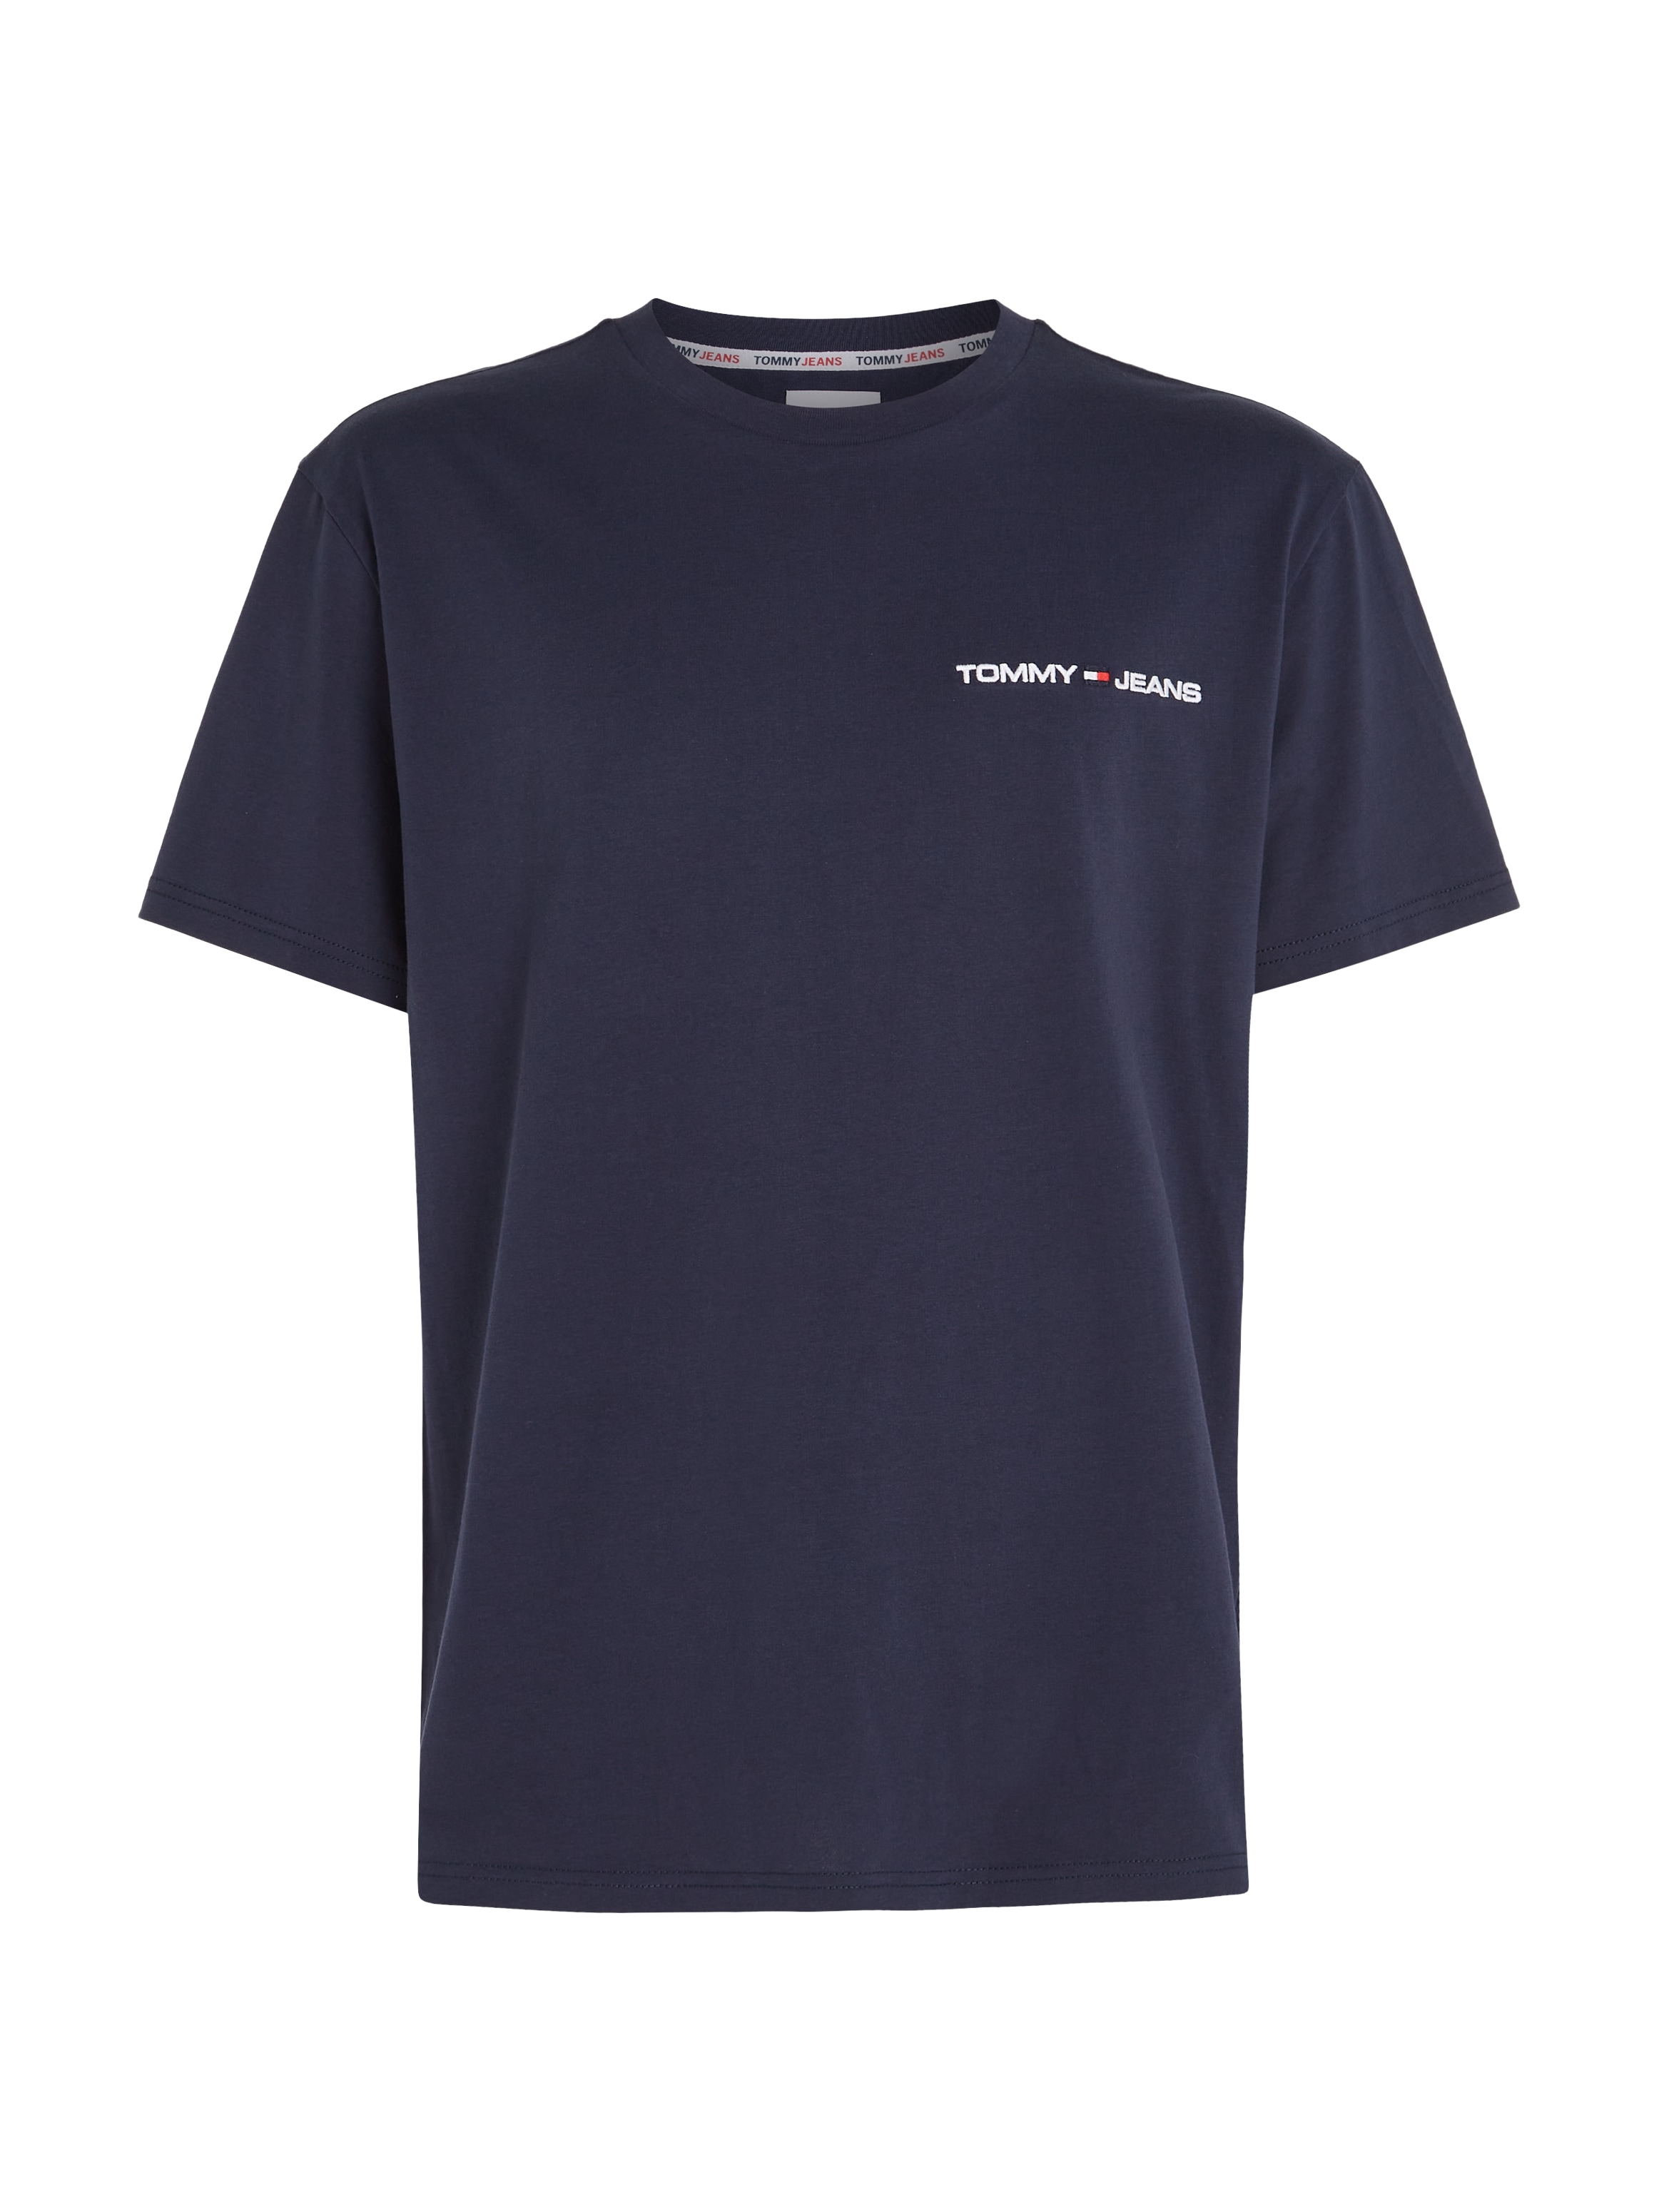 TEE« Jeans Tommy CLSC CHEST T-Shirt »TJM LINEAR kaufen